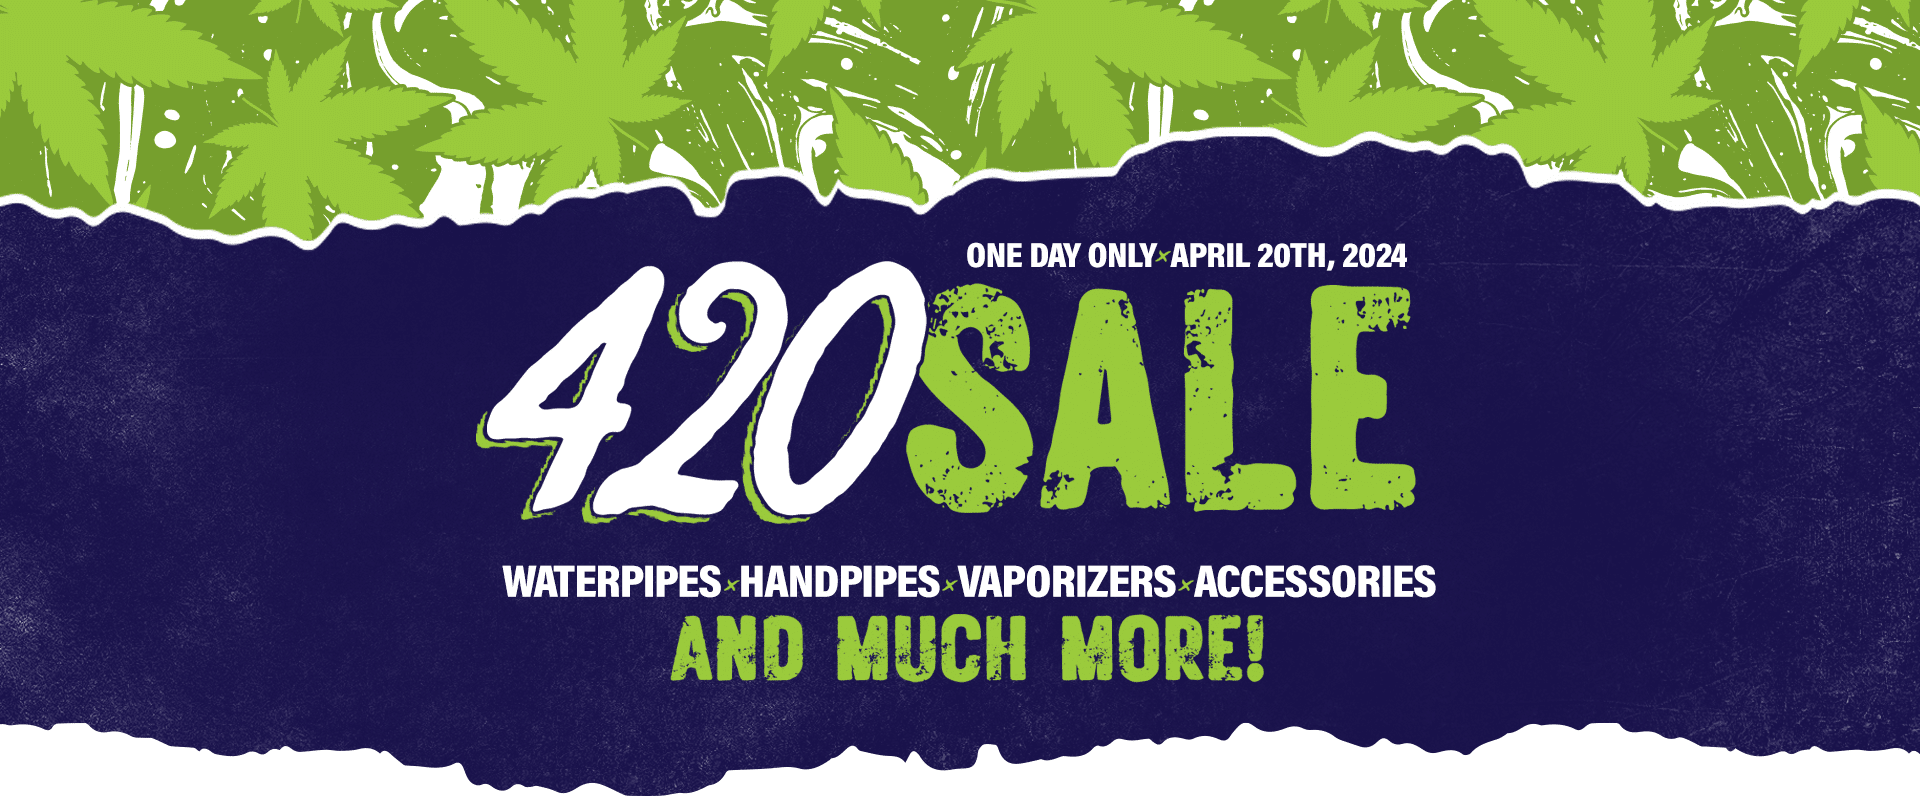 Wild Bill's 420 Sale! One Day Only • April 20th